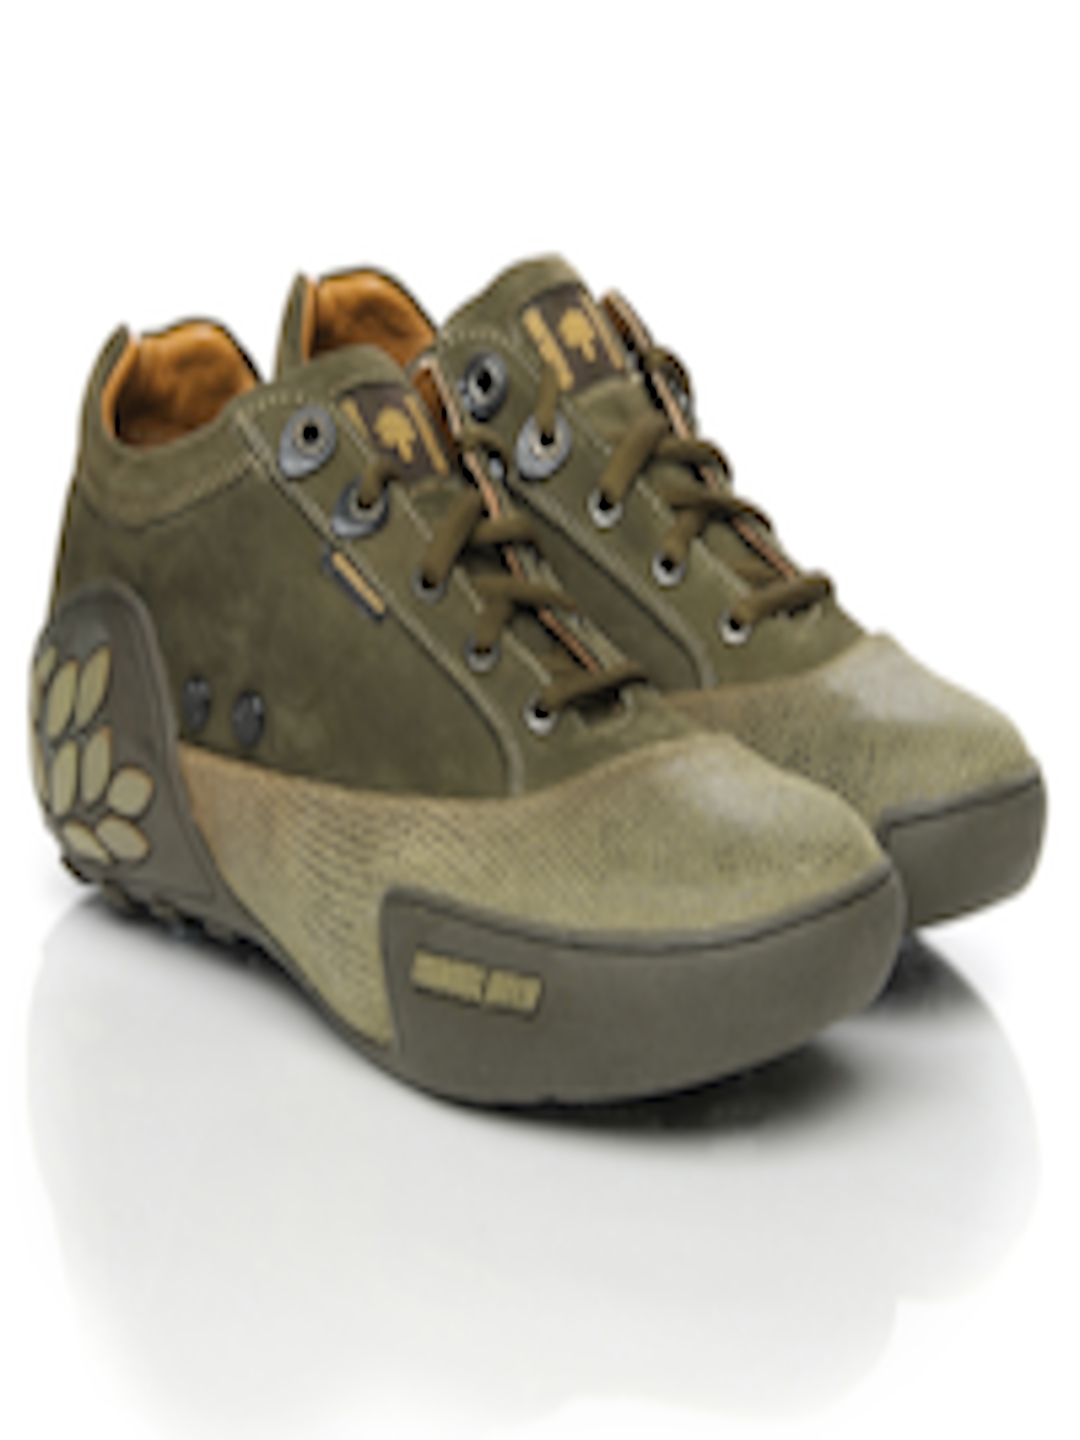 Buy Woodland Men Olive Green Leather Casual Shoes Casual